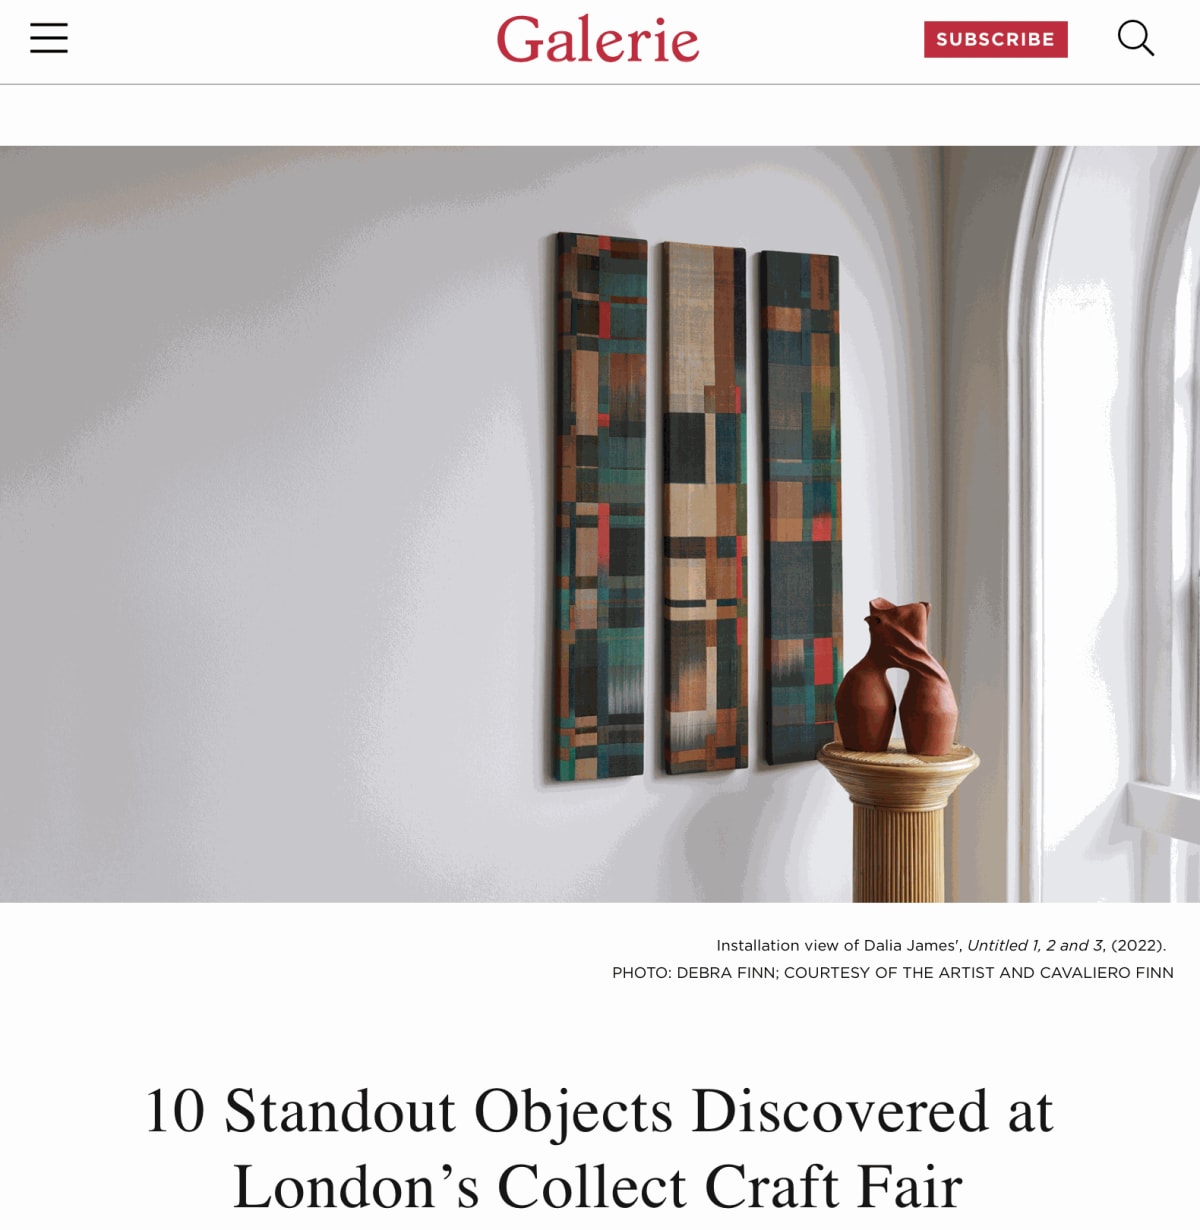 Galerie - 10 Standout Objects Discovered at London’s Collect Craft Fair